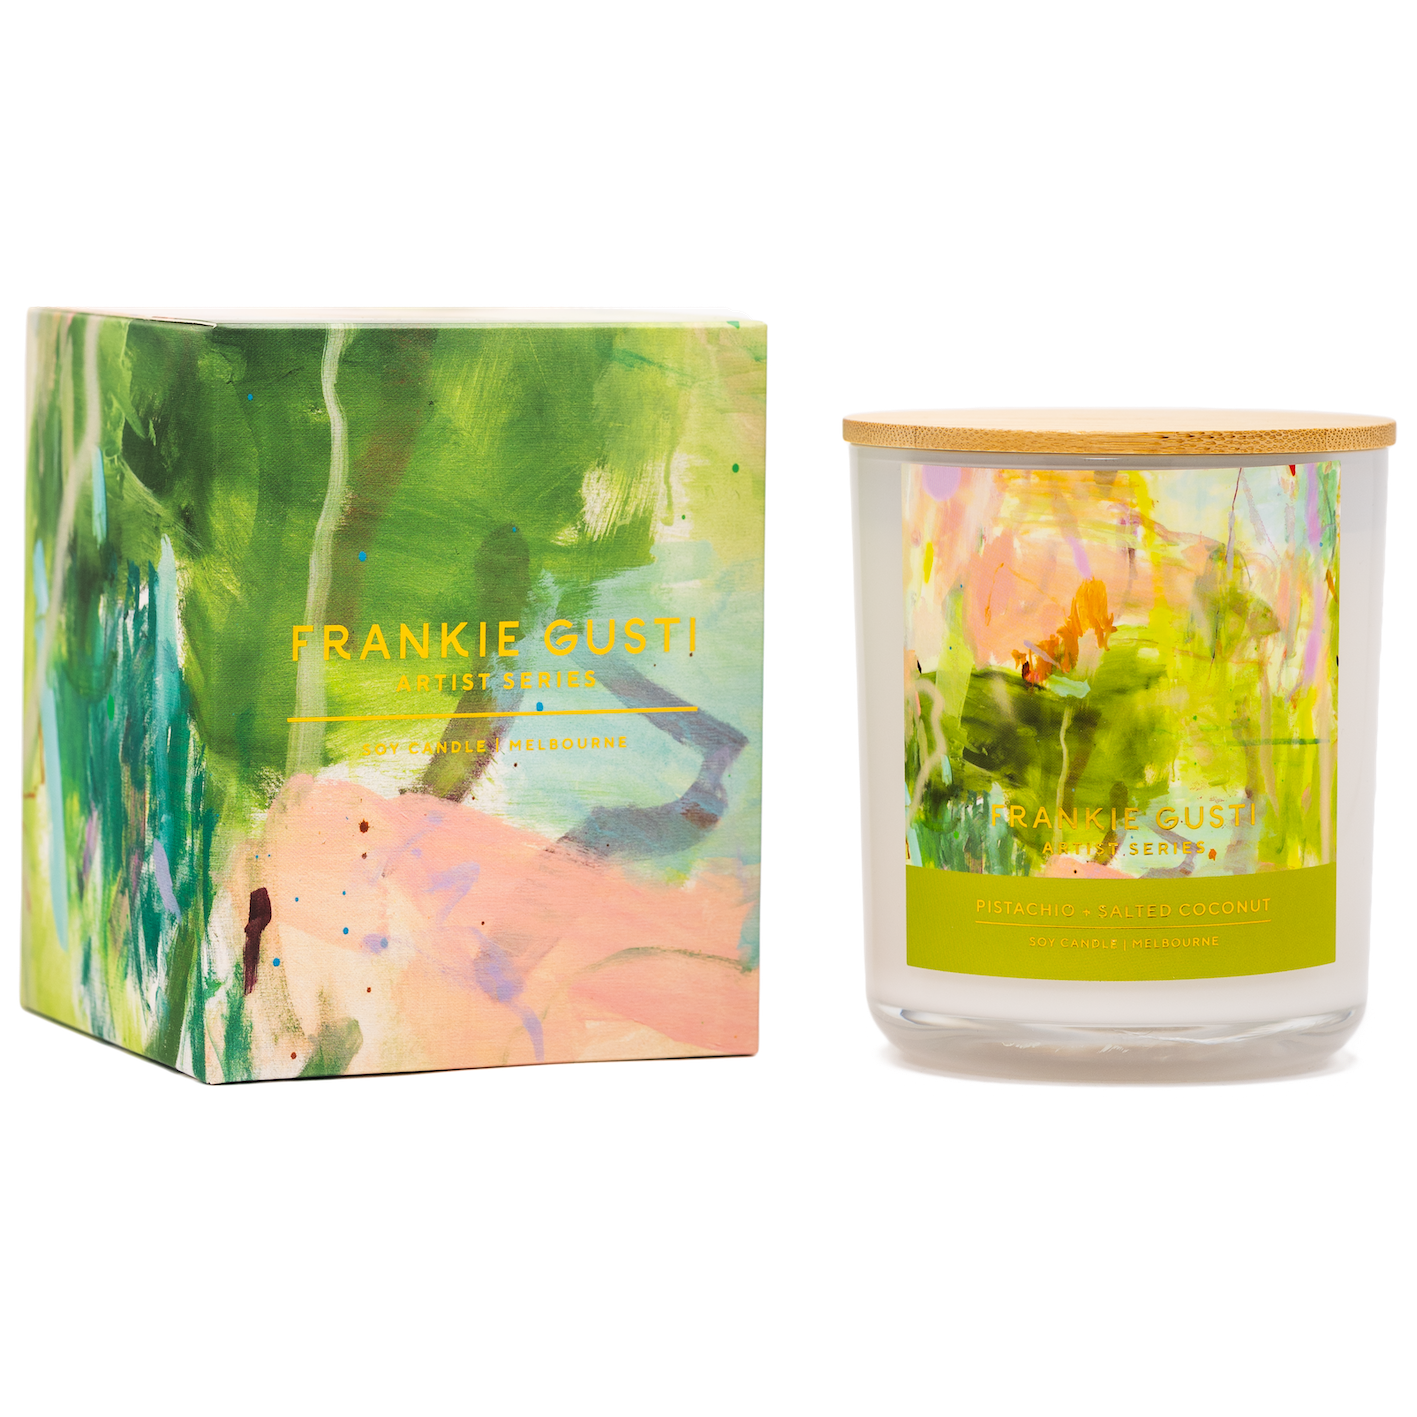 Frankie Gusti - Artist Series Candle Pistachio & Salted Coconut